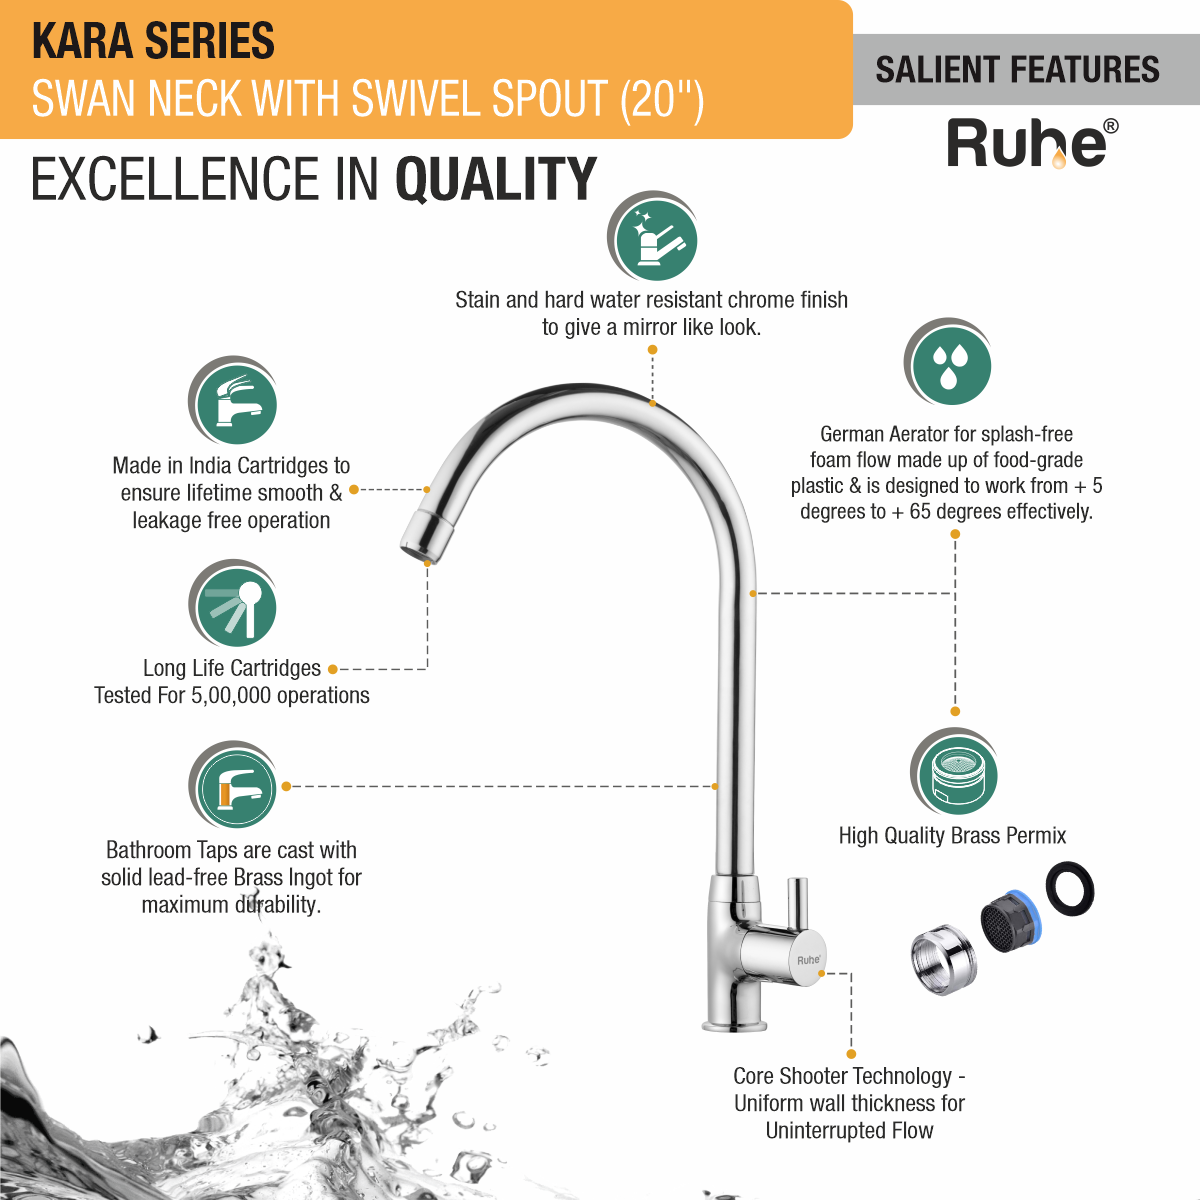 Kara Swan Neck with Large (20 inches) Round Swivel Spout Faucet features